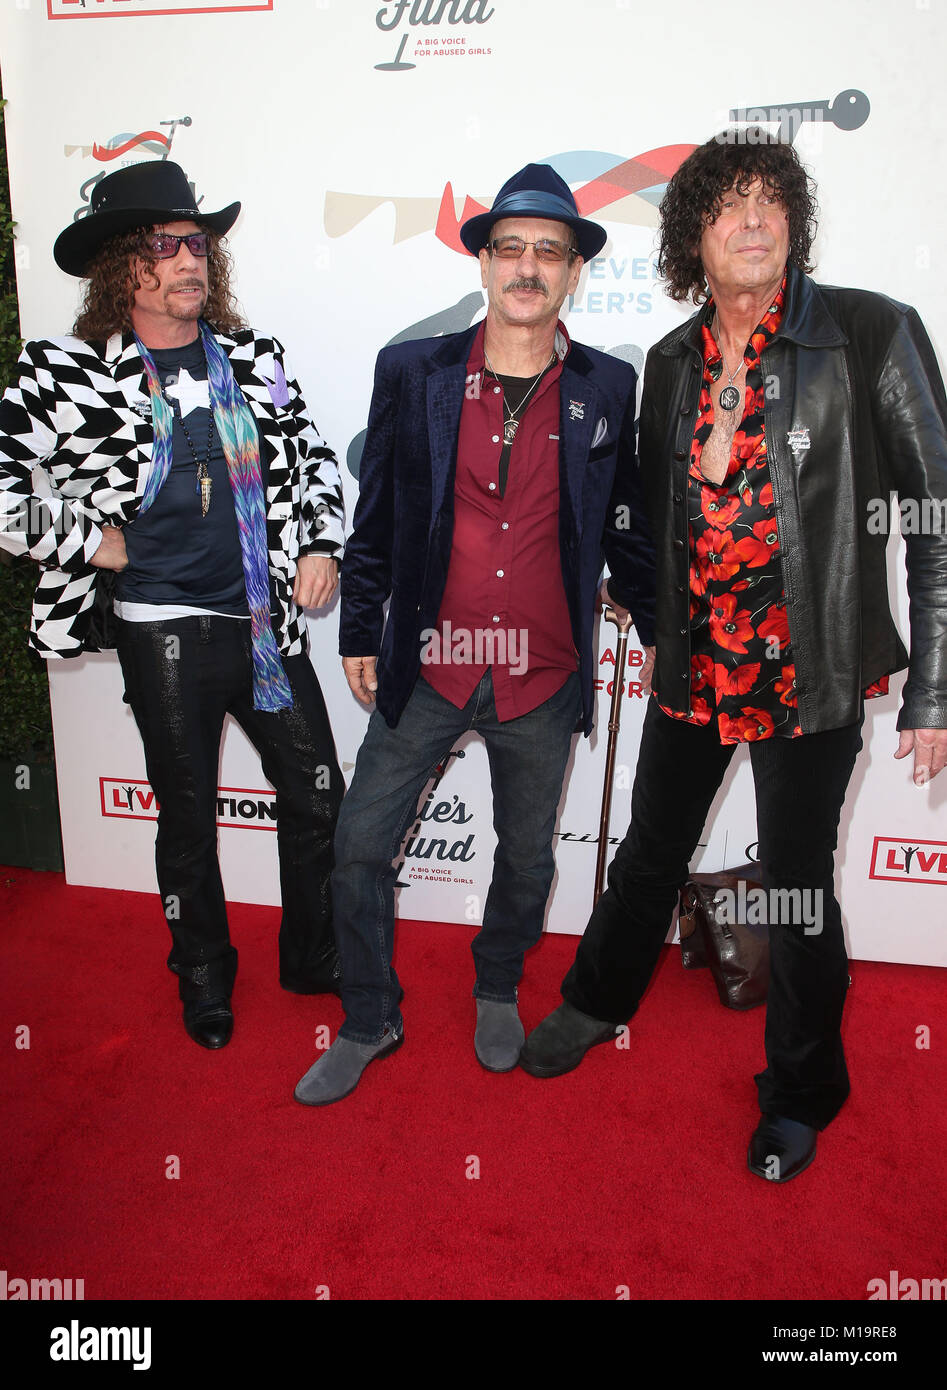 January 28, 2018 - Los Angeles, CA, U.S. - LOS ANGELES, CA - JANUARY 28: Stuart Smith, Joe Retta, Bruce Quarto, at Steven Tyler and Live Nation presents Inaugural Janie's Fund Gala & GRAMMY Viewing Party at Red Studios in Los Angeles, California on January 28, 2018. Credit: Faye Sadou/MediaPunch Credit: Faye Sadou/AdMedia/ZUMA Wire/Alamy Live News Stock Photo